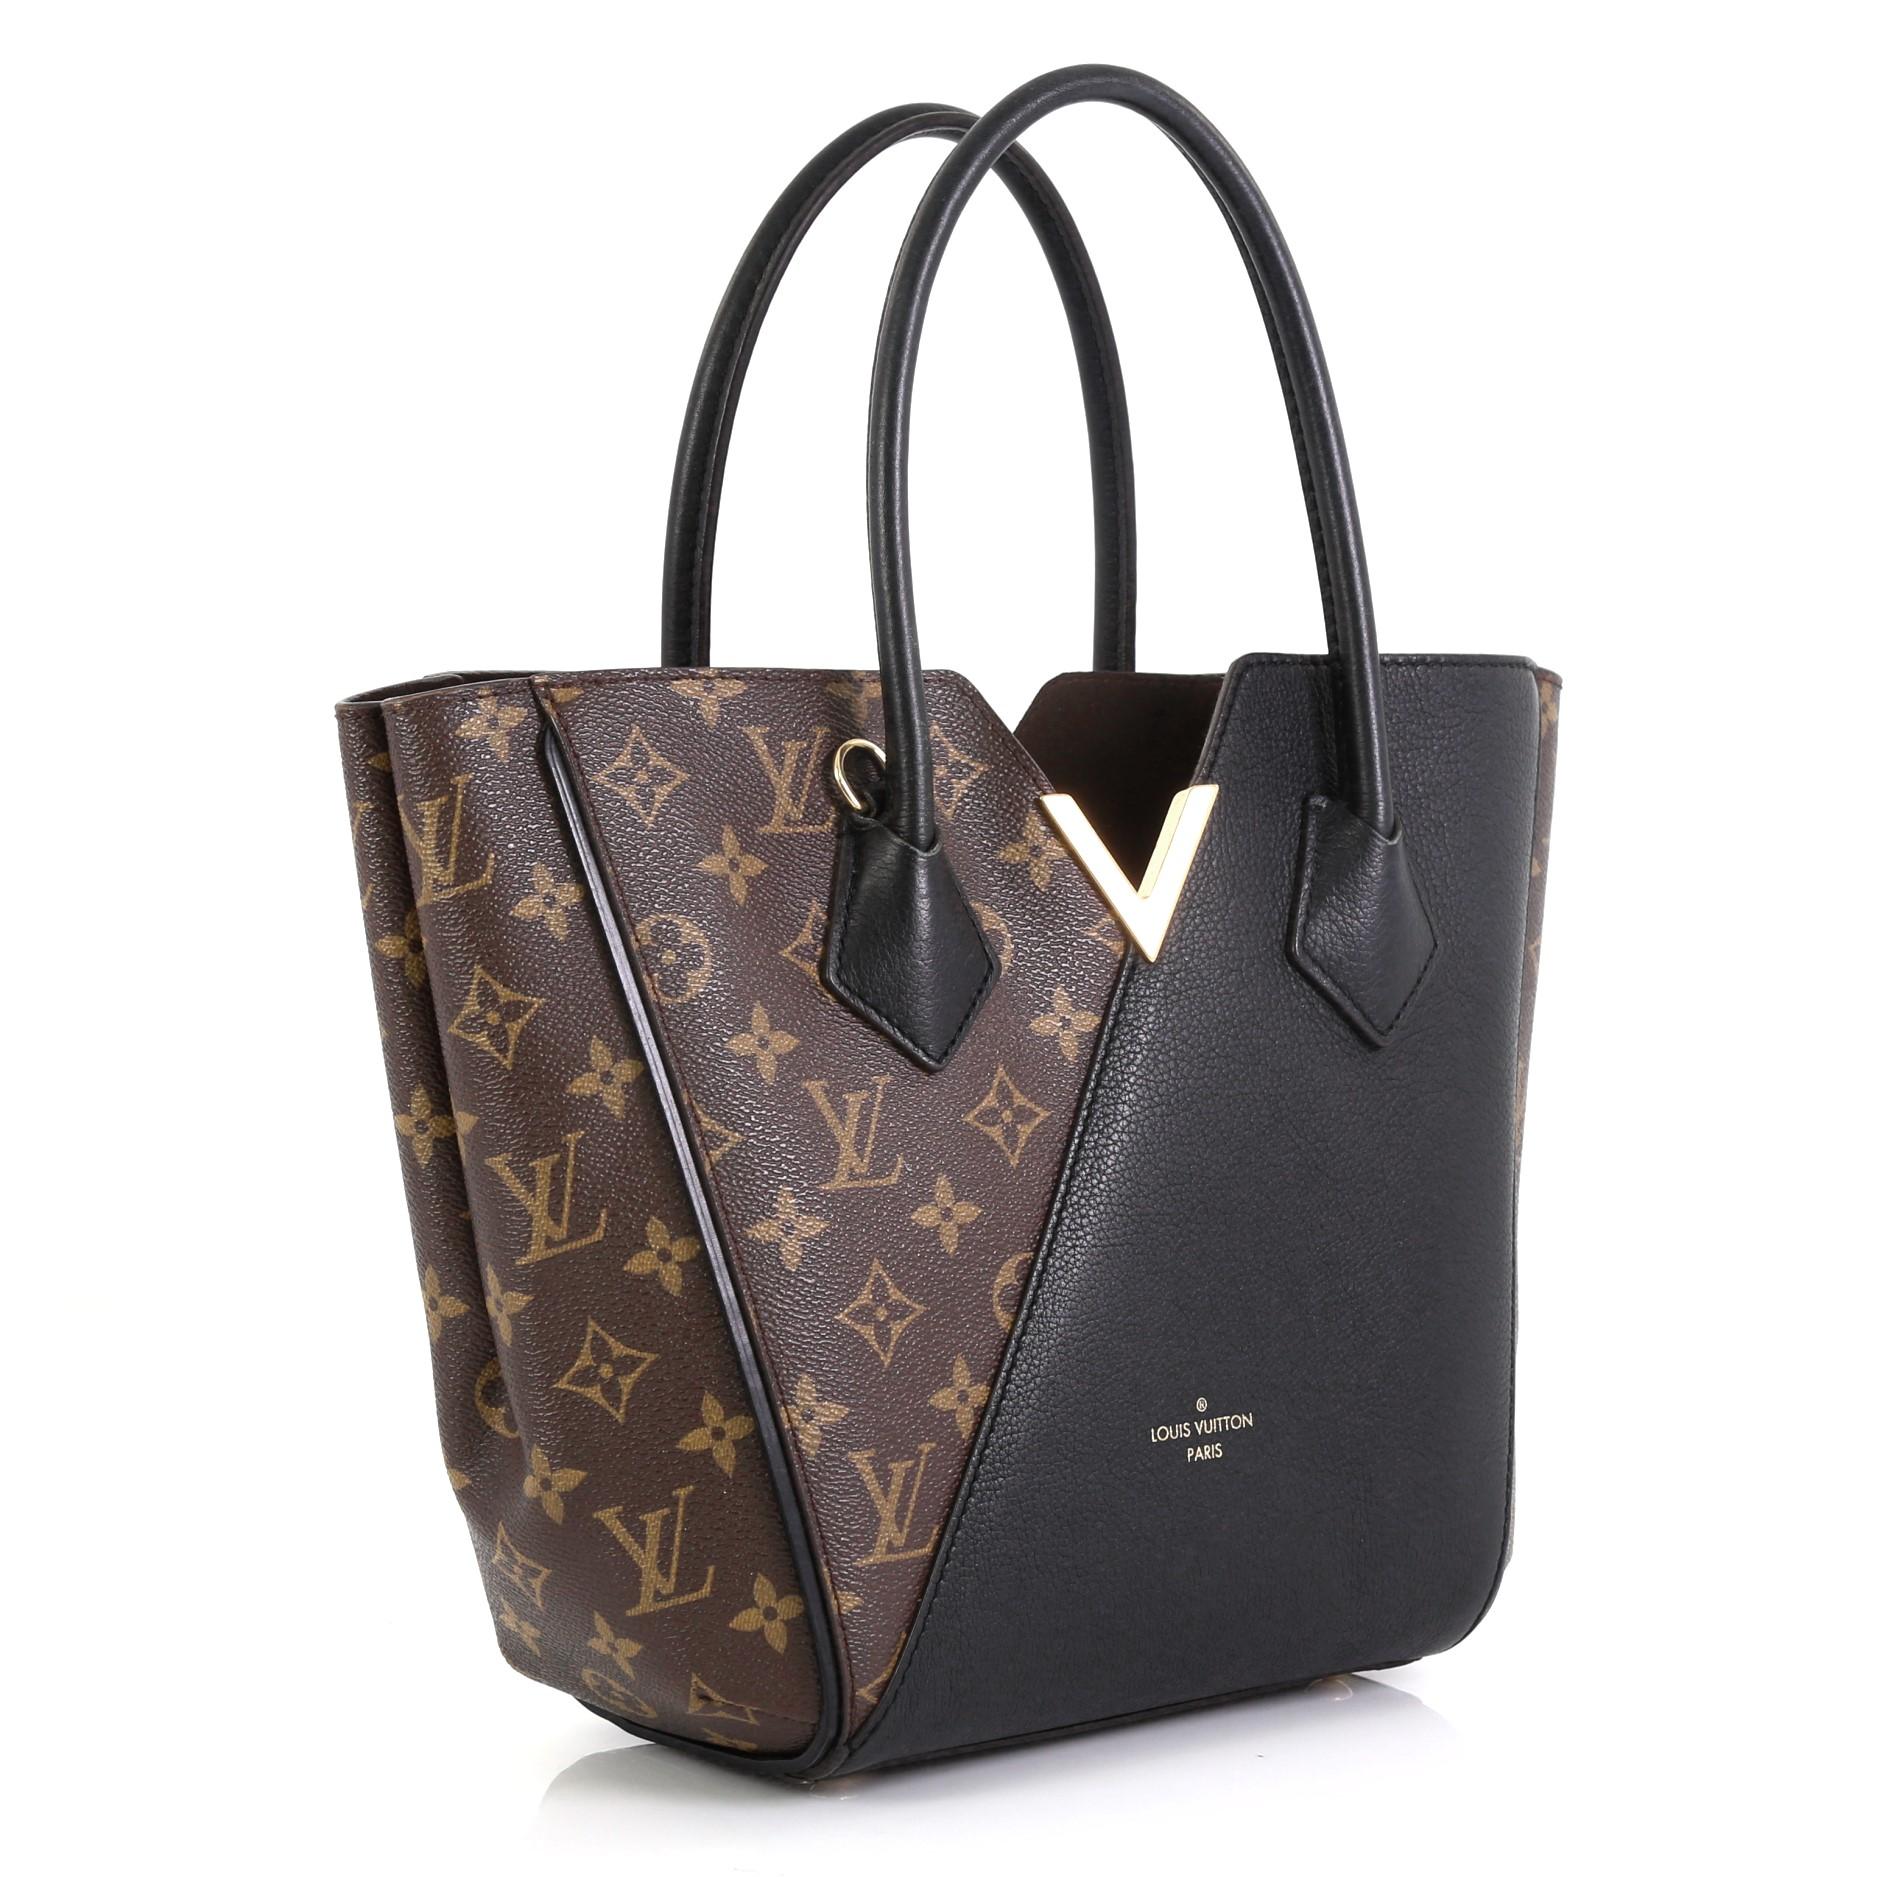 This Louis Vuitton Kimono Handbag Monogram Canvas and Leather PM, crafted from brown monogram coated canvas and leather, features dual rolled handles, metallic V accent, and gold-tone hardware. Its wide top with hook-clasp closure opens to a brown